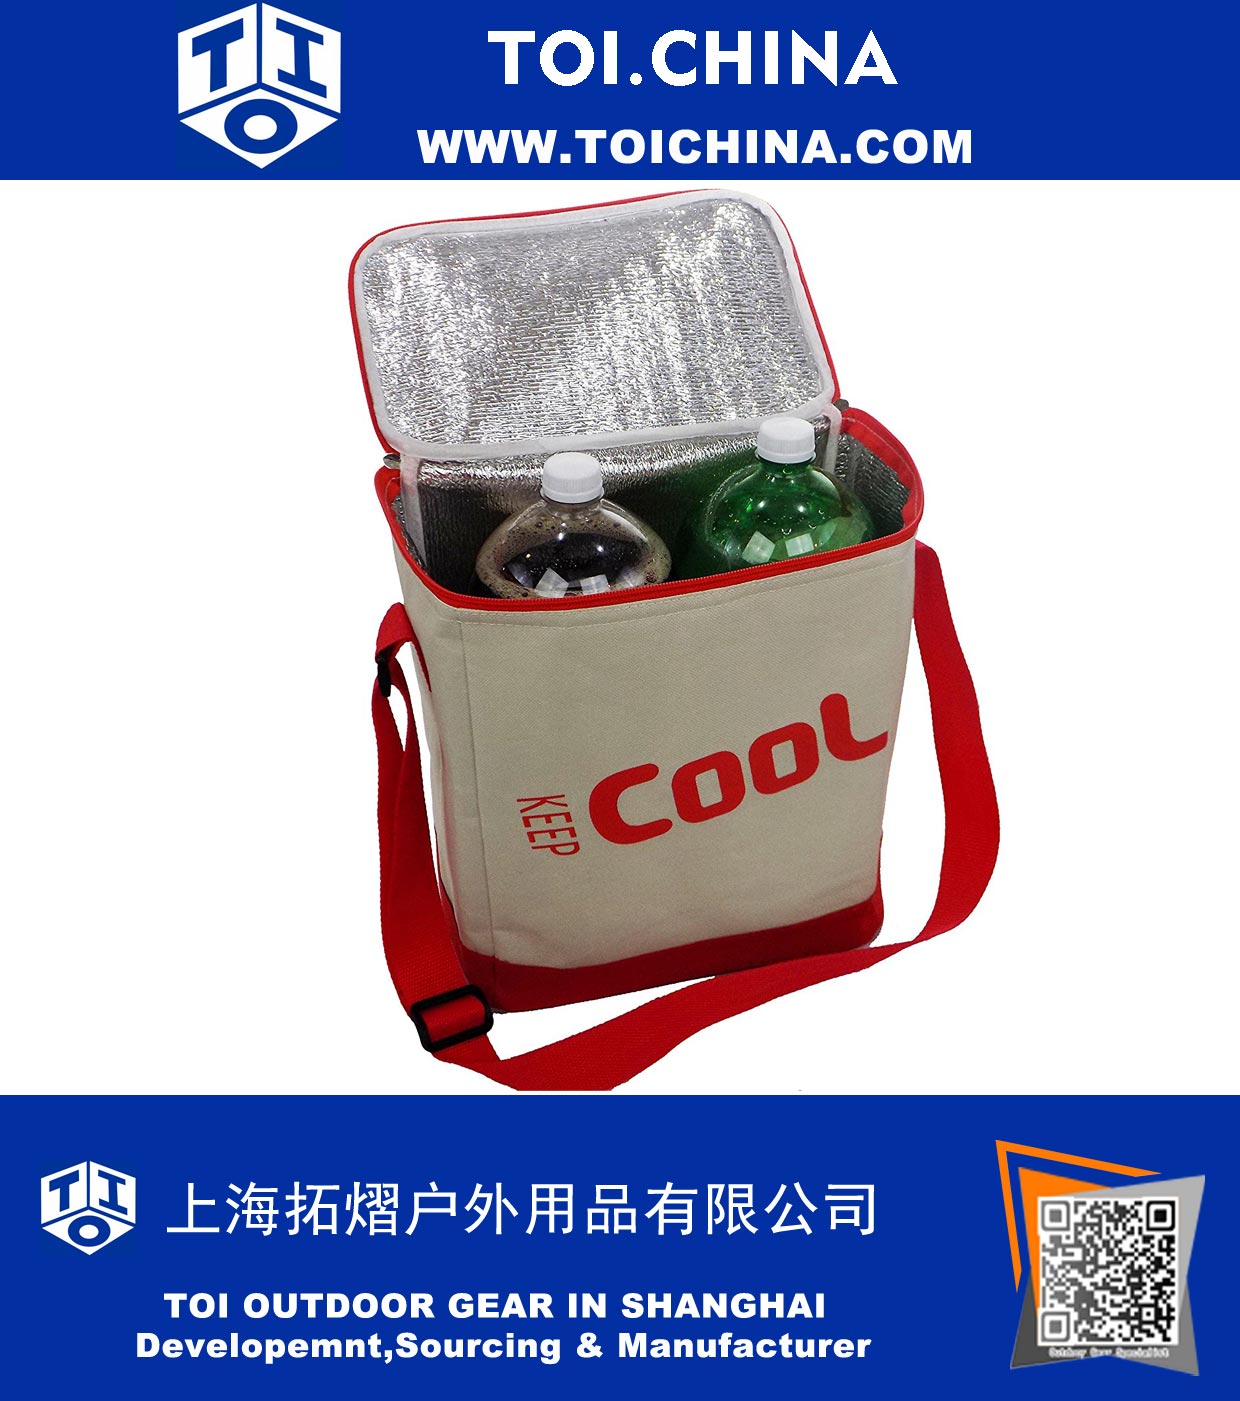 Soft Cooler Bag with Aluminum Thermal Liner and Adjustable Shoulder Strap, Red and White